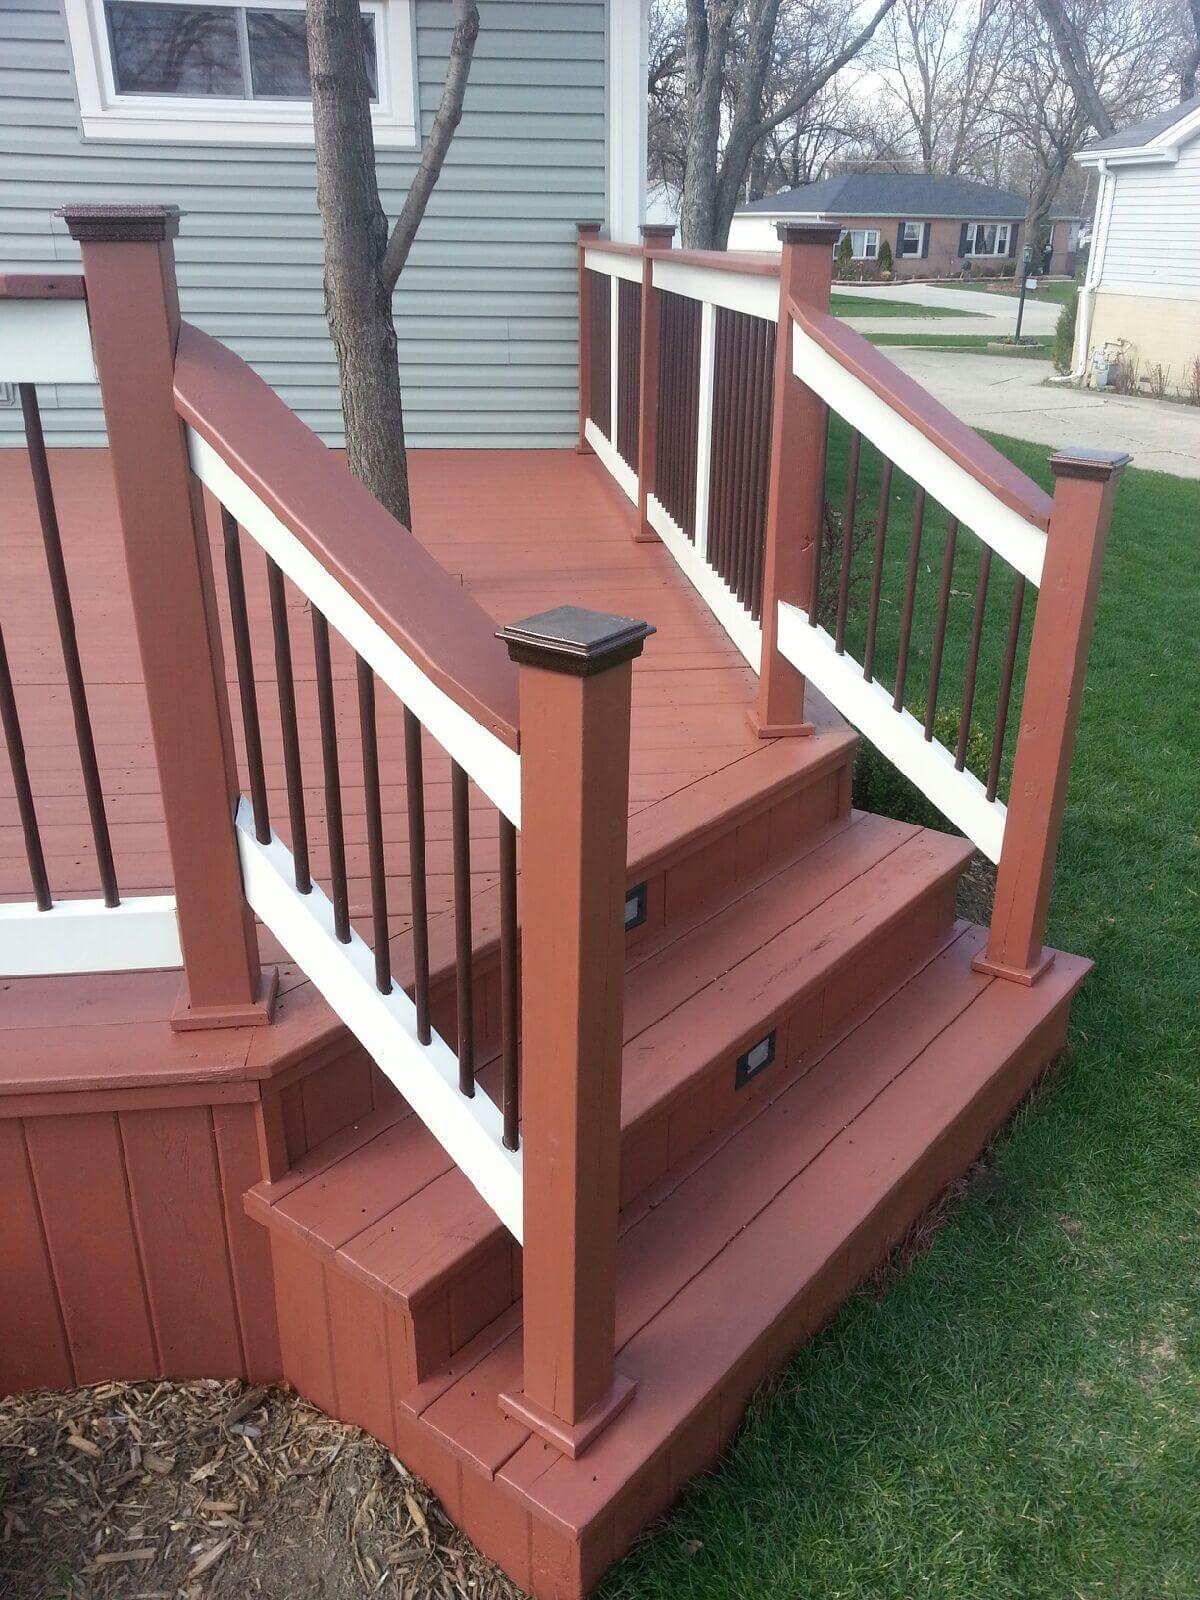 Repairs and maintenance for your deck, fence, and exterior wood staining. - Deck Staining Highland Park - Deck Cleaning Services